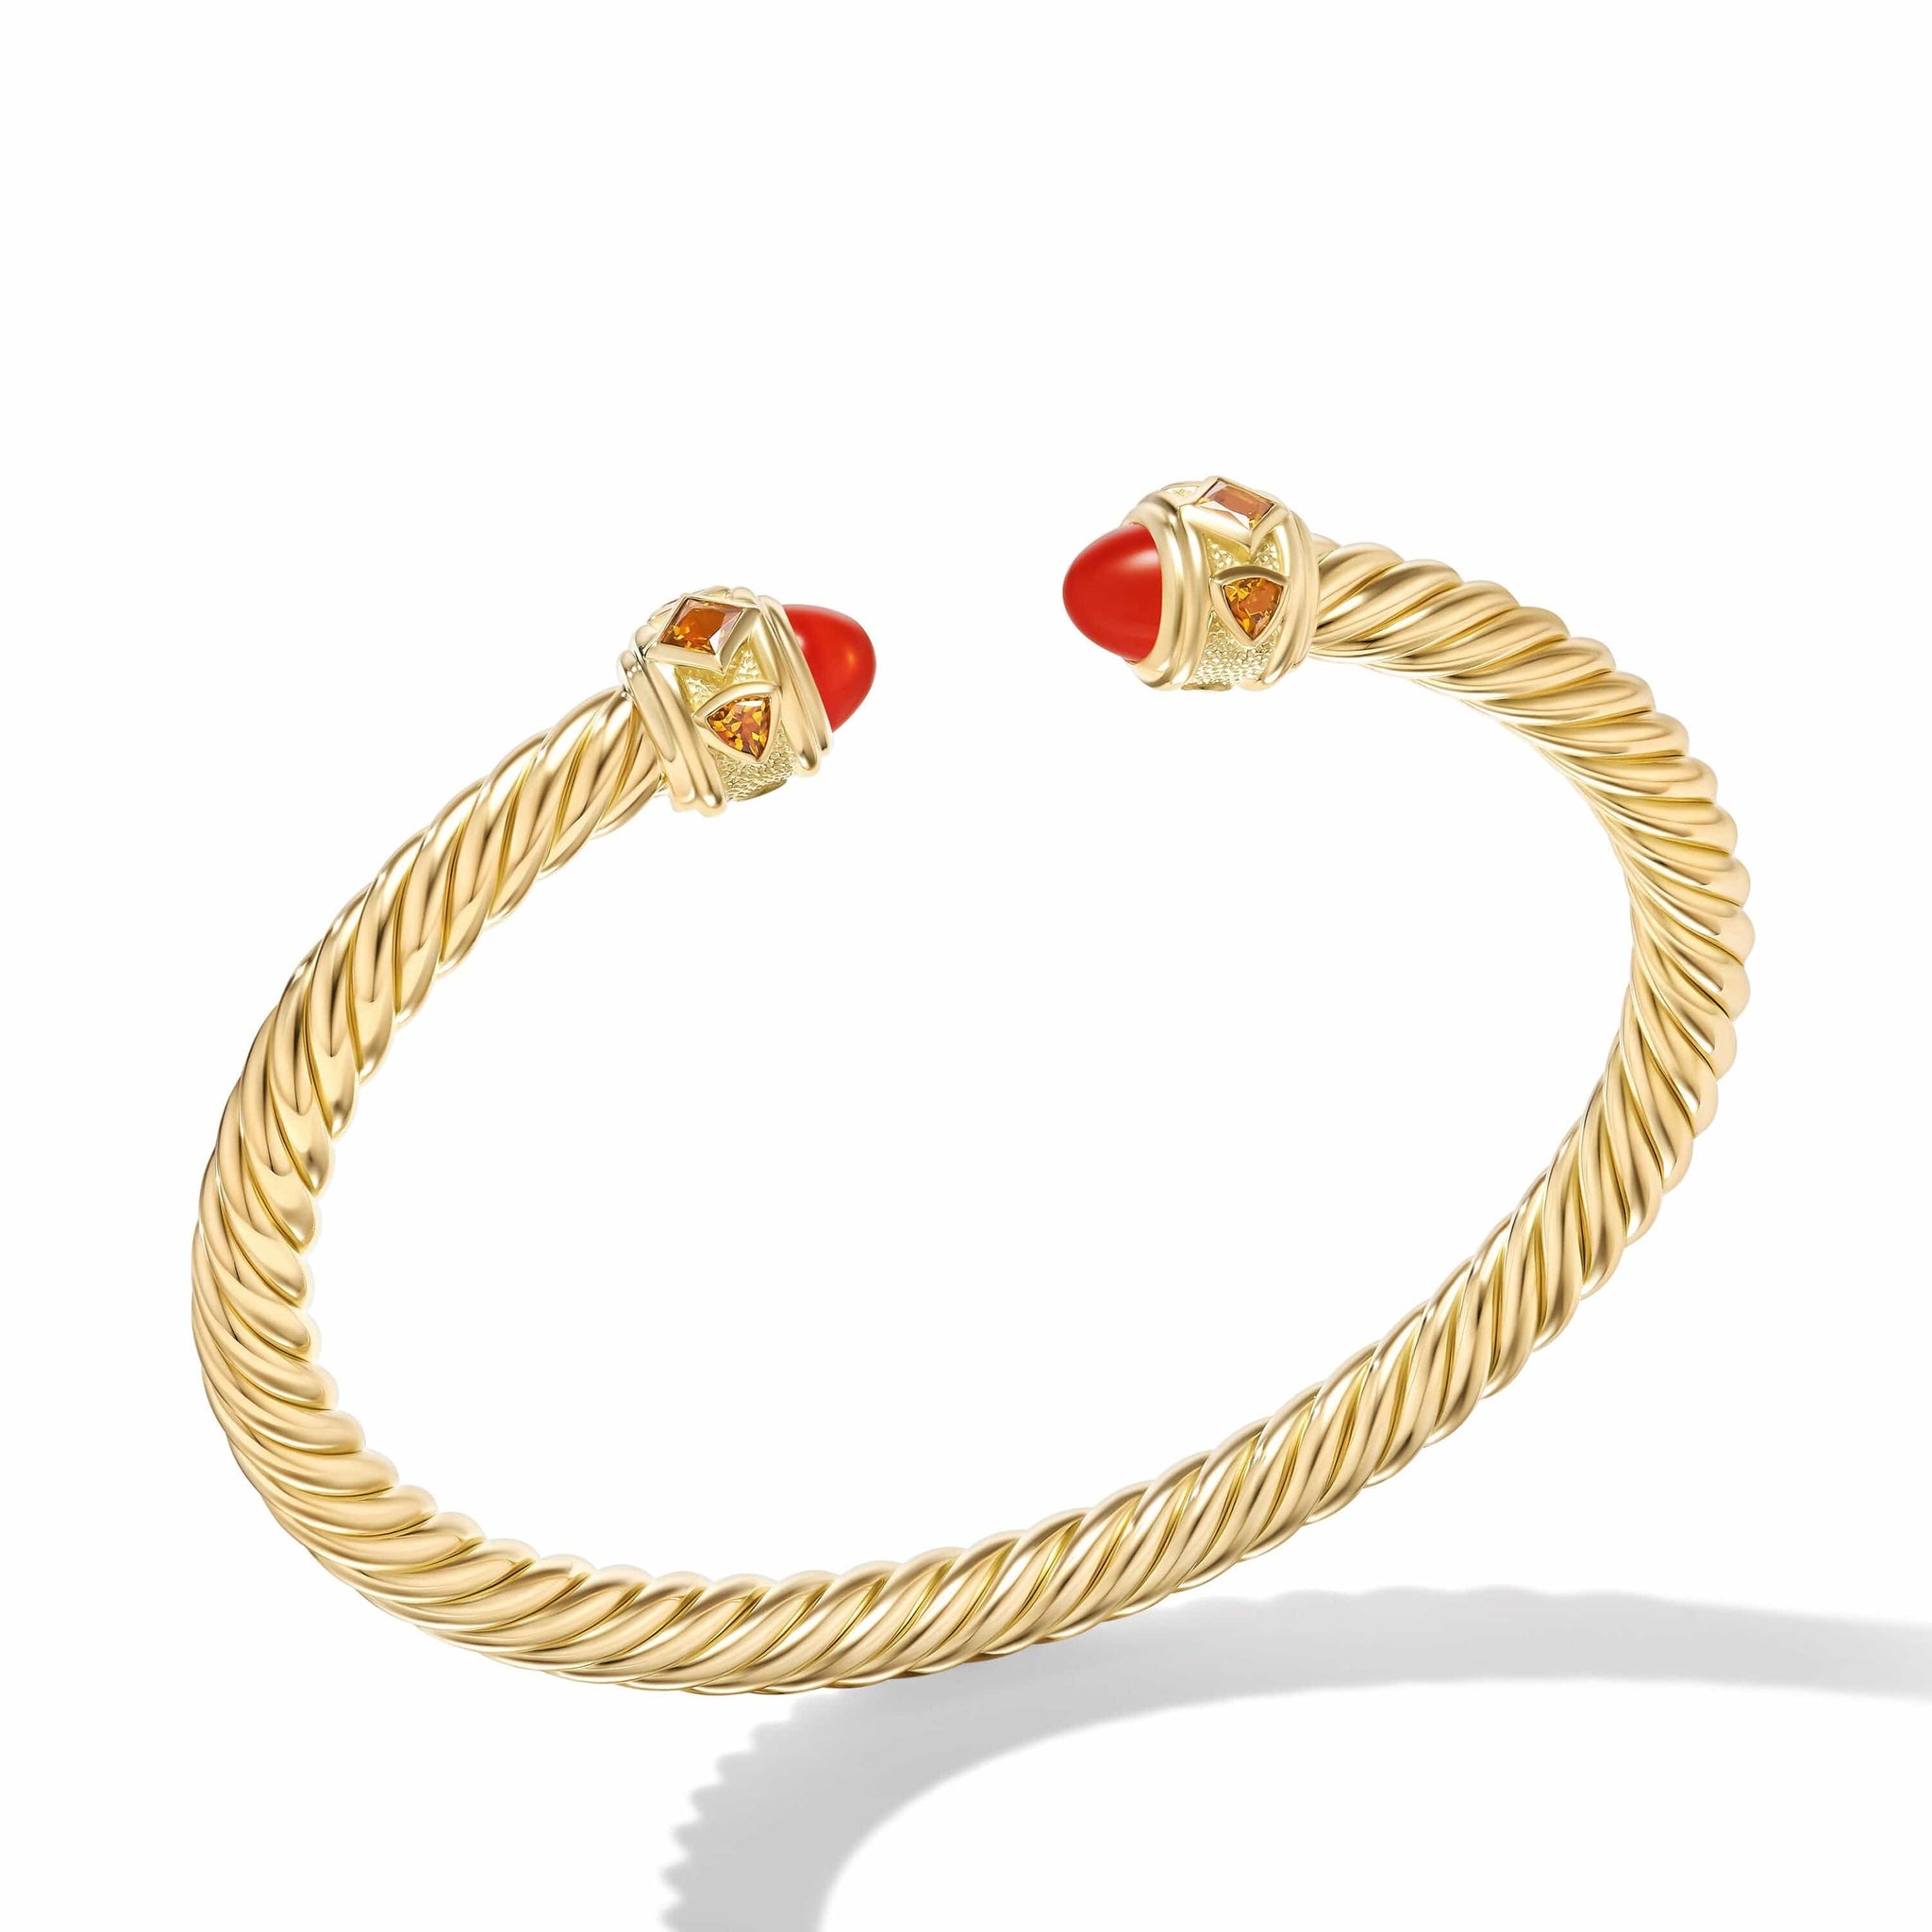 Renaissance® Bracelet in 18K Yellow Gold with Carnelian and Citrine